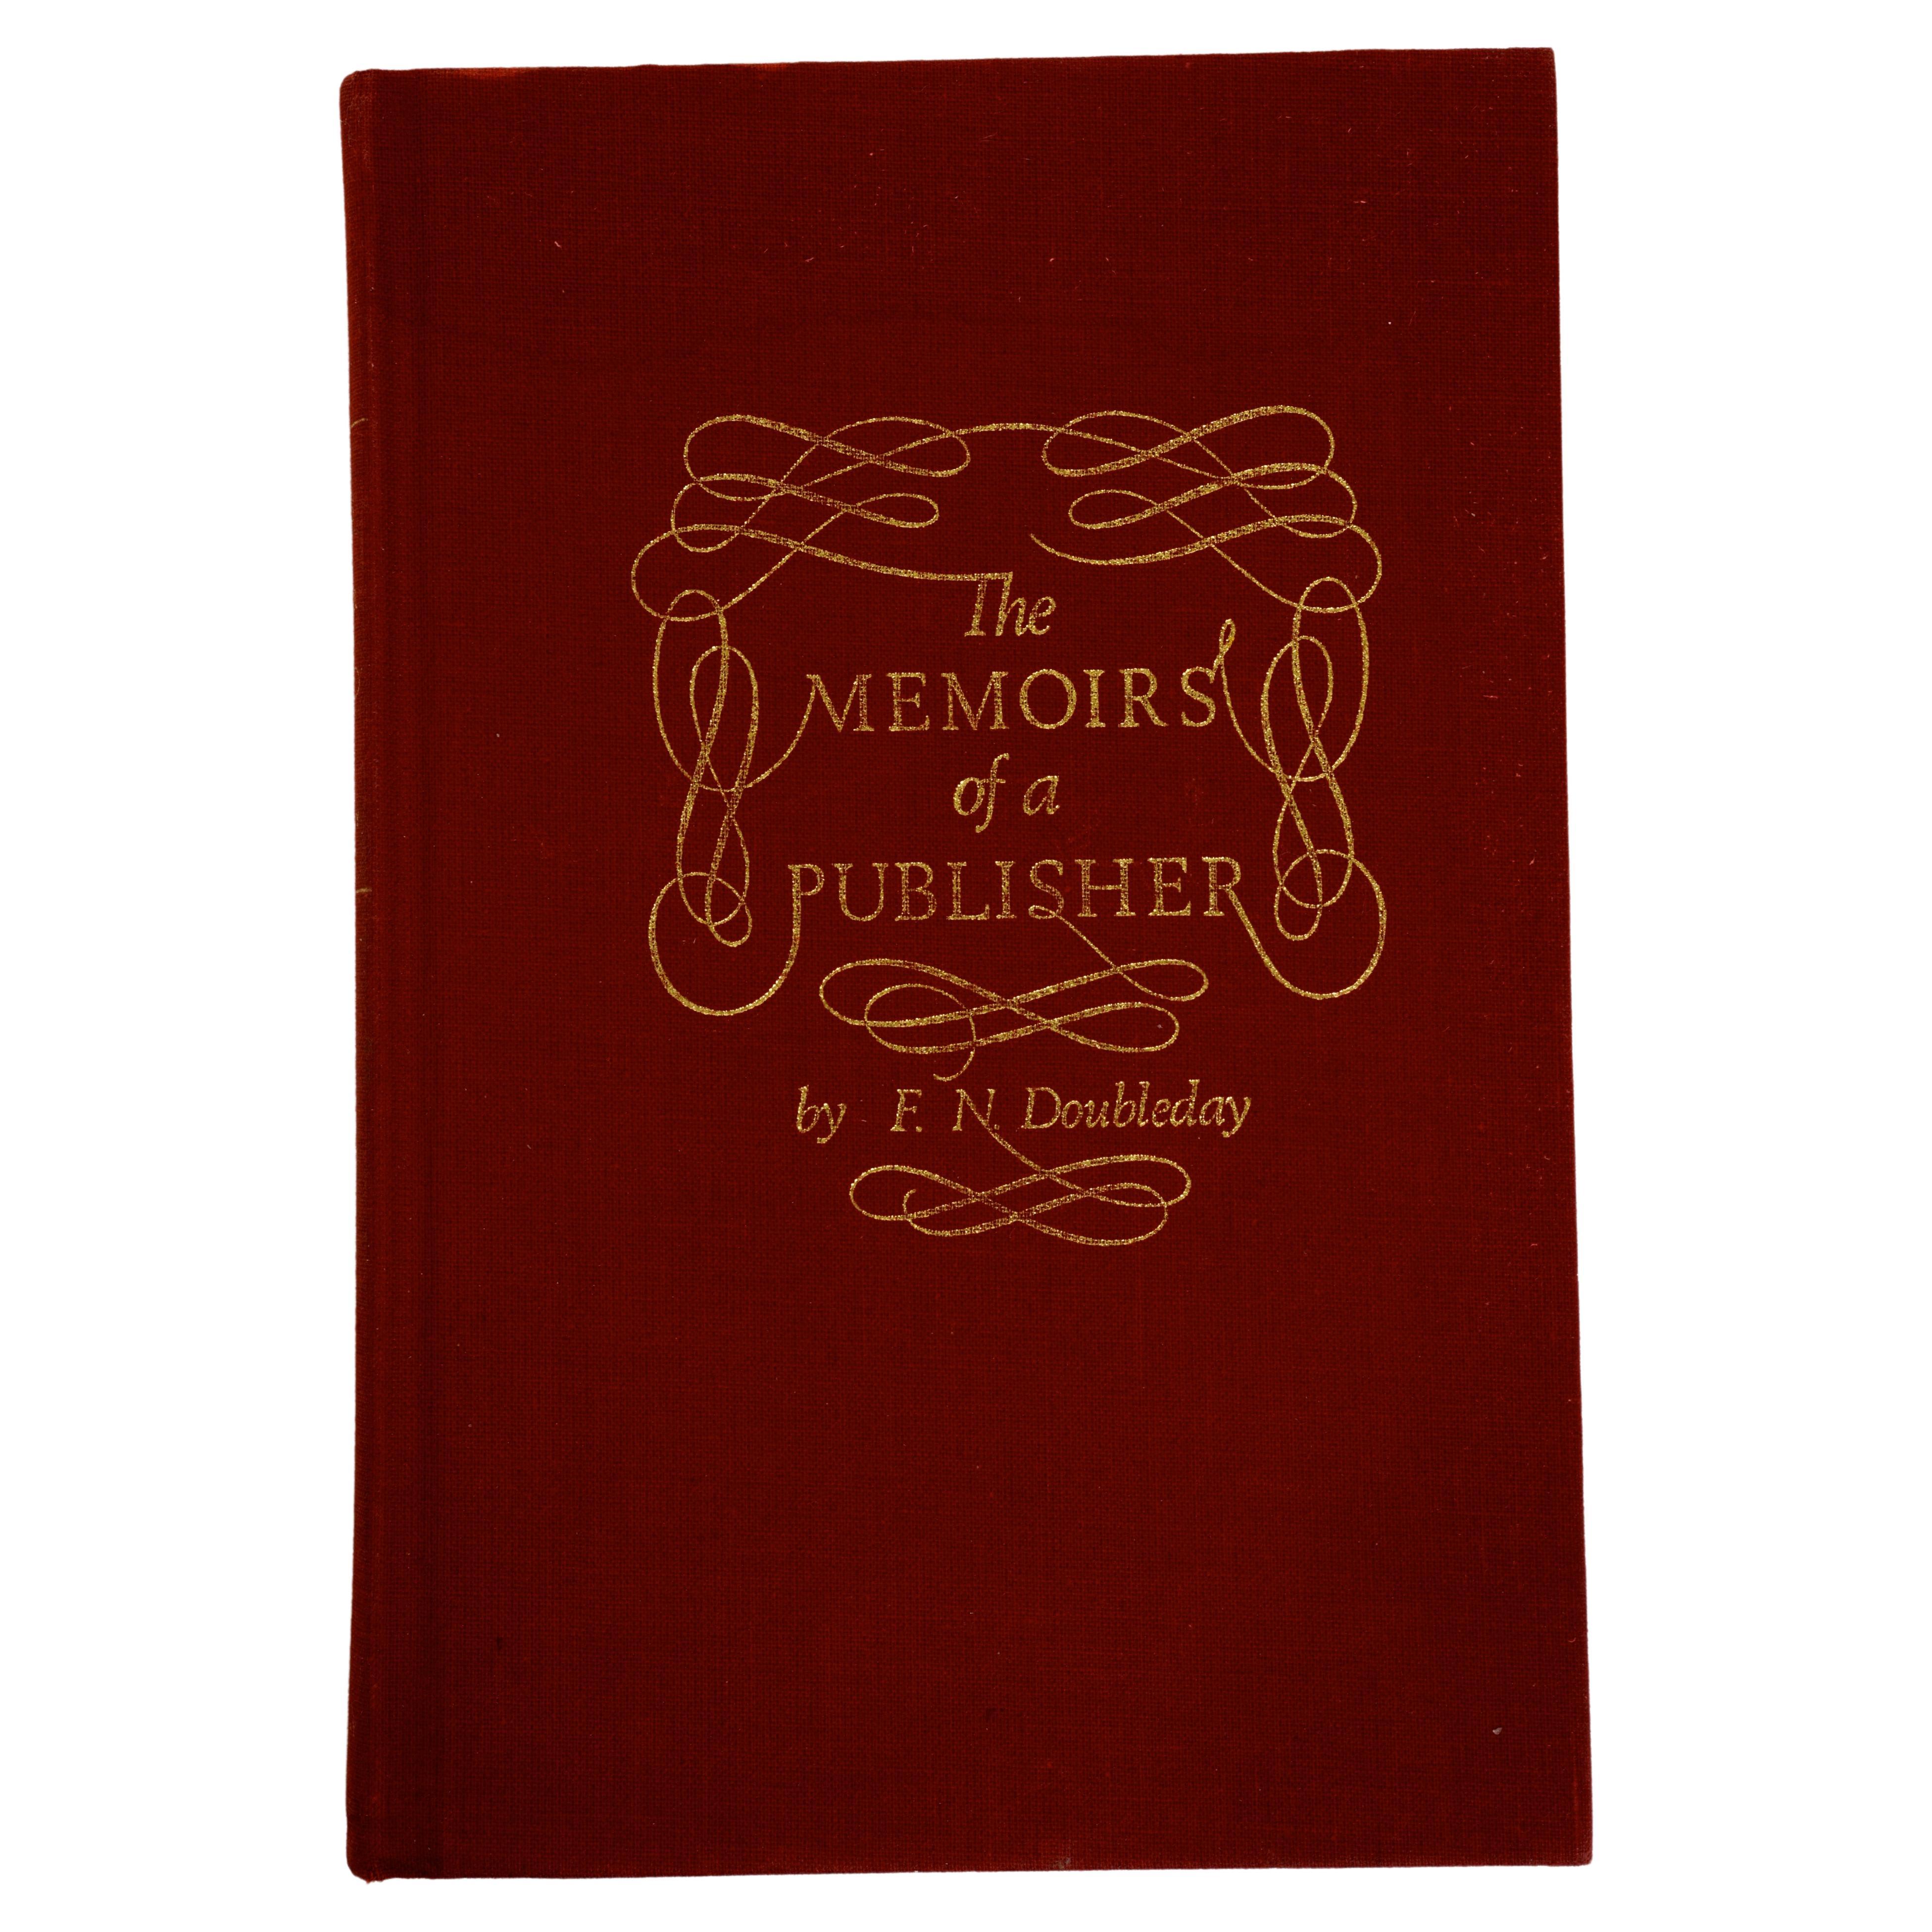 Memoirs of a Publisher by F. N. Doubleday, 1st Ed